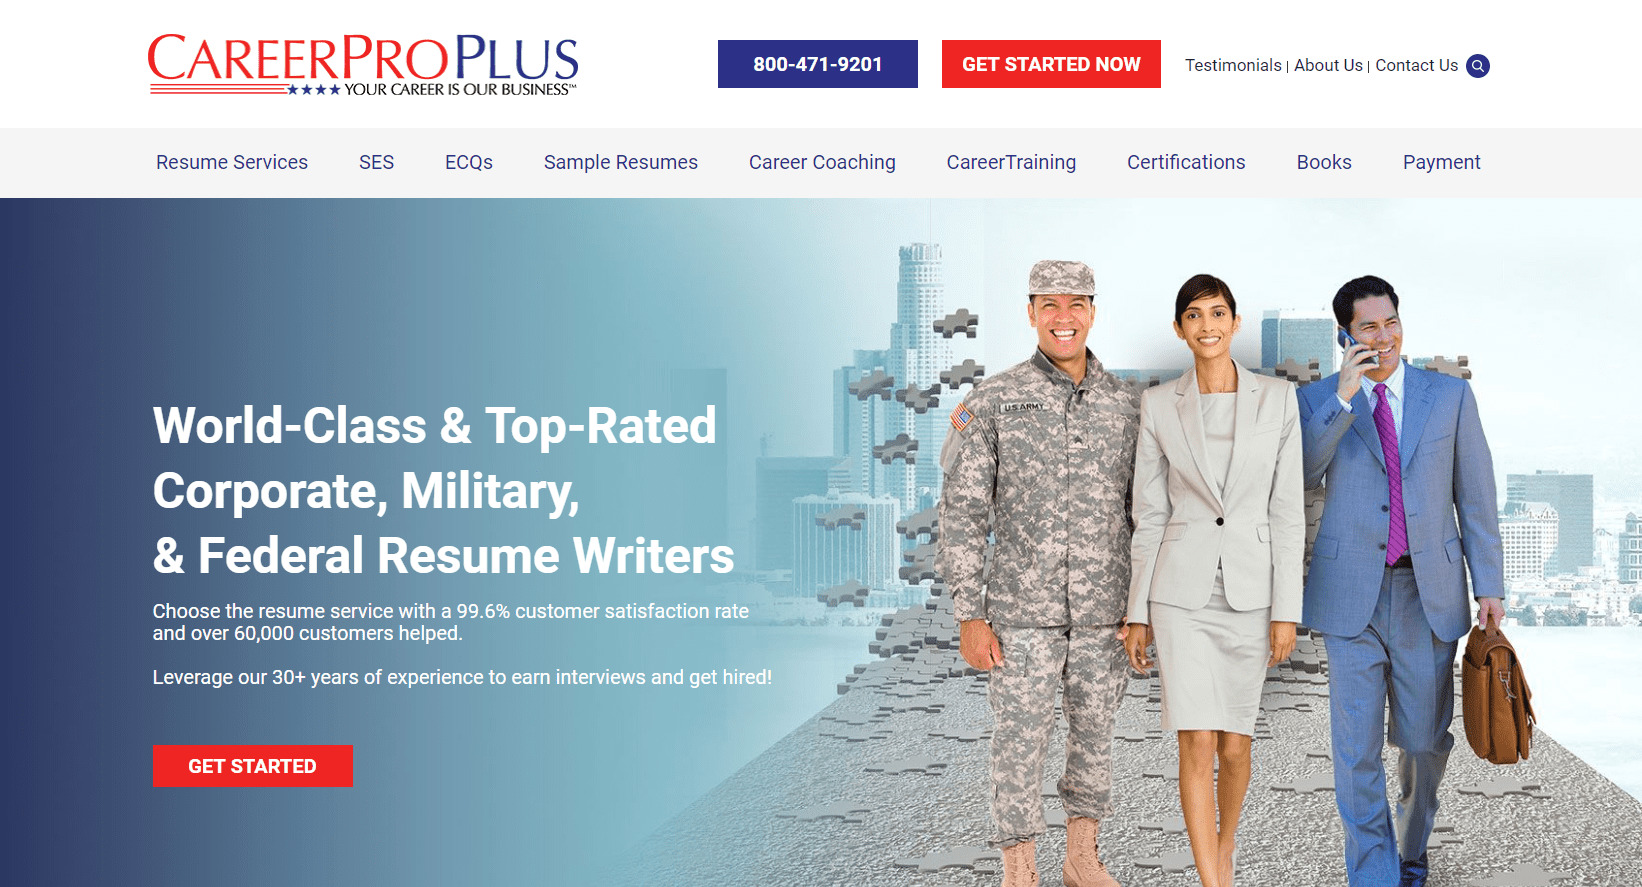 Best resume writing services for educators military